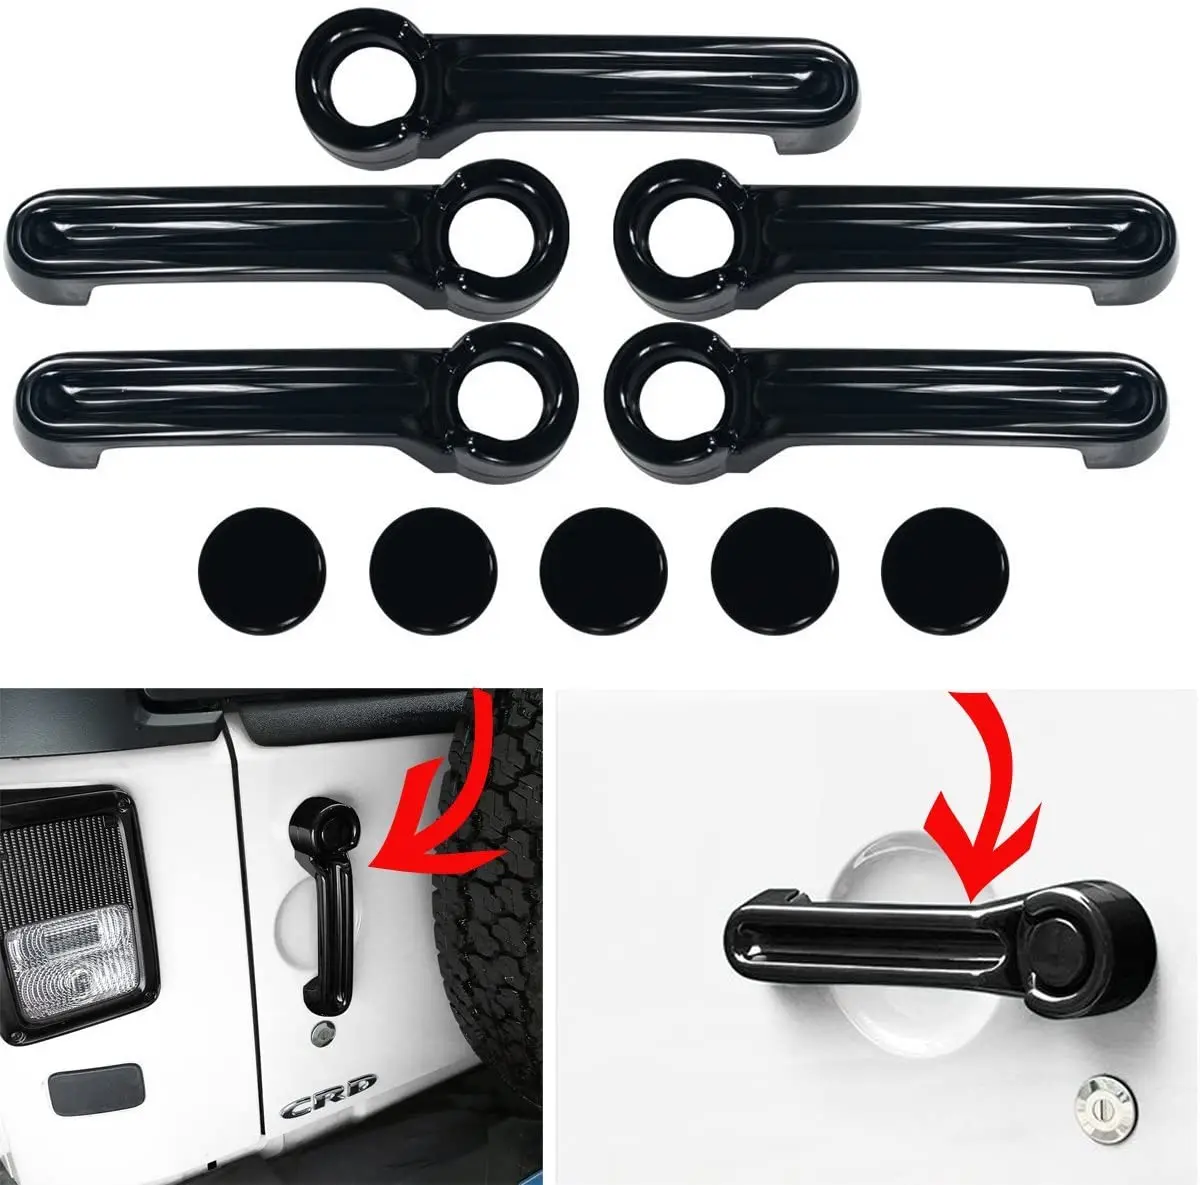 MOEBULB 5x5 Plated 4 Door Pull Handle Cover & Tailgate Handle Cover for 2007-2017 Jeep Wrangler JK 2007-2011 Dodge Nitro 2008-2012 Jeep Liberty Black 